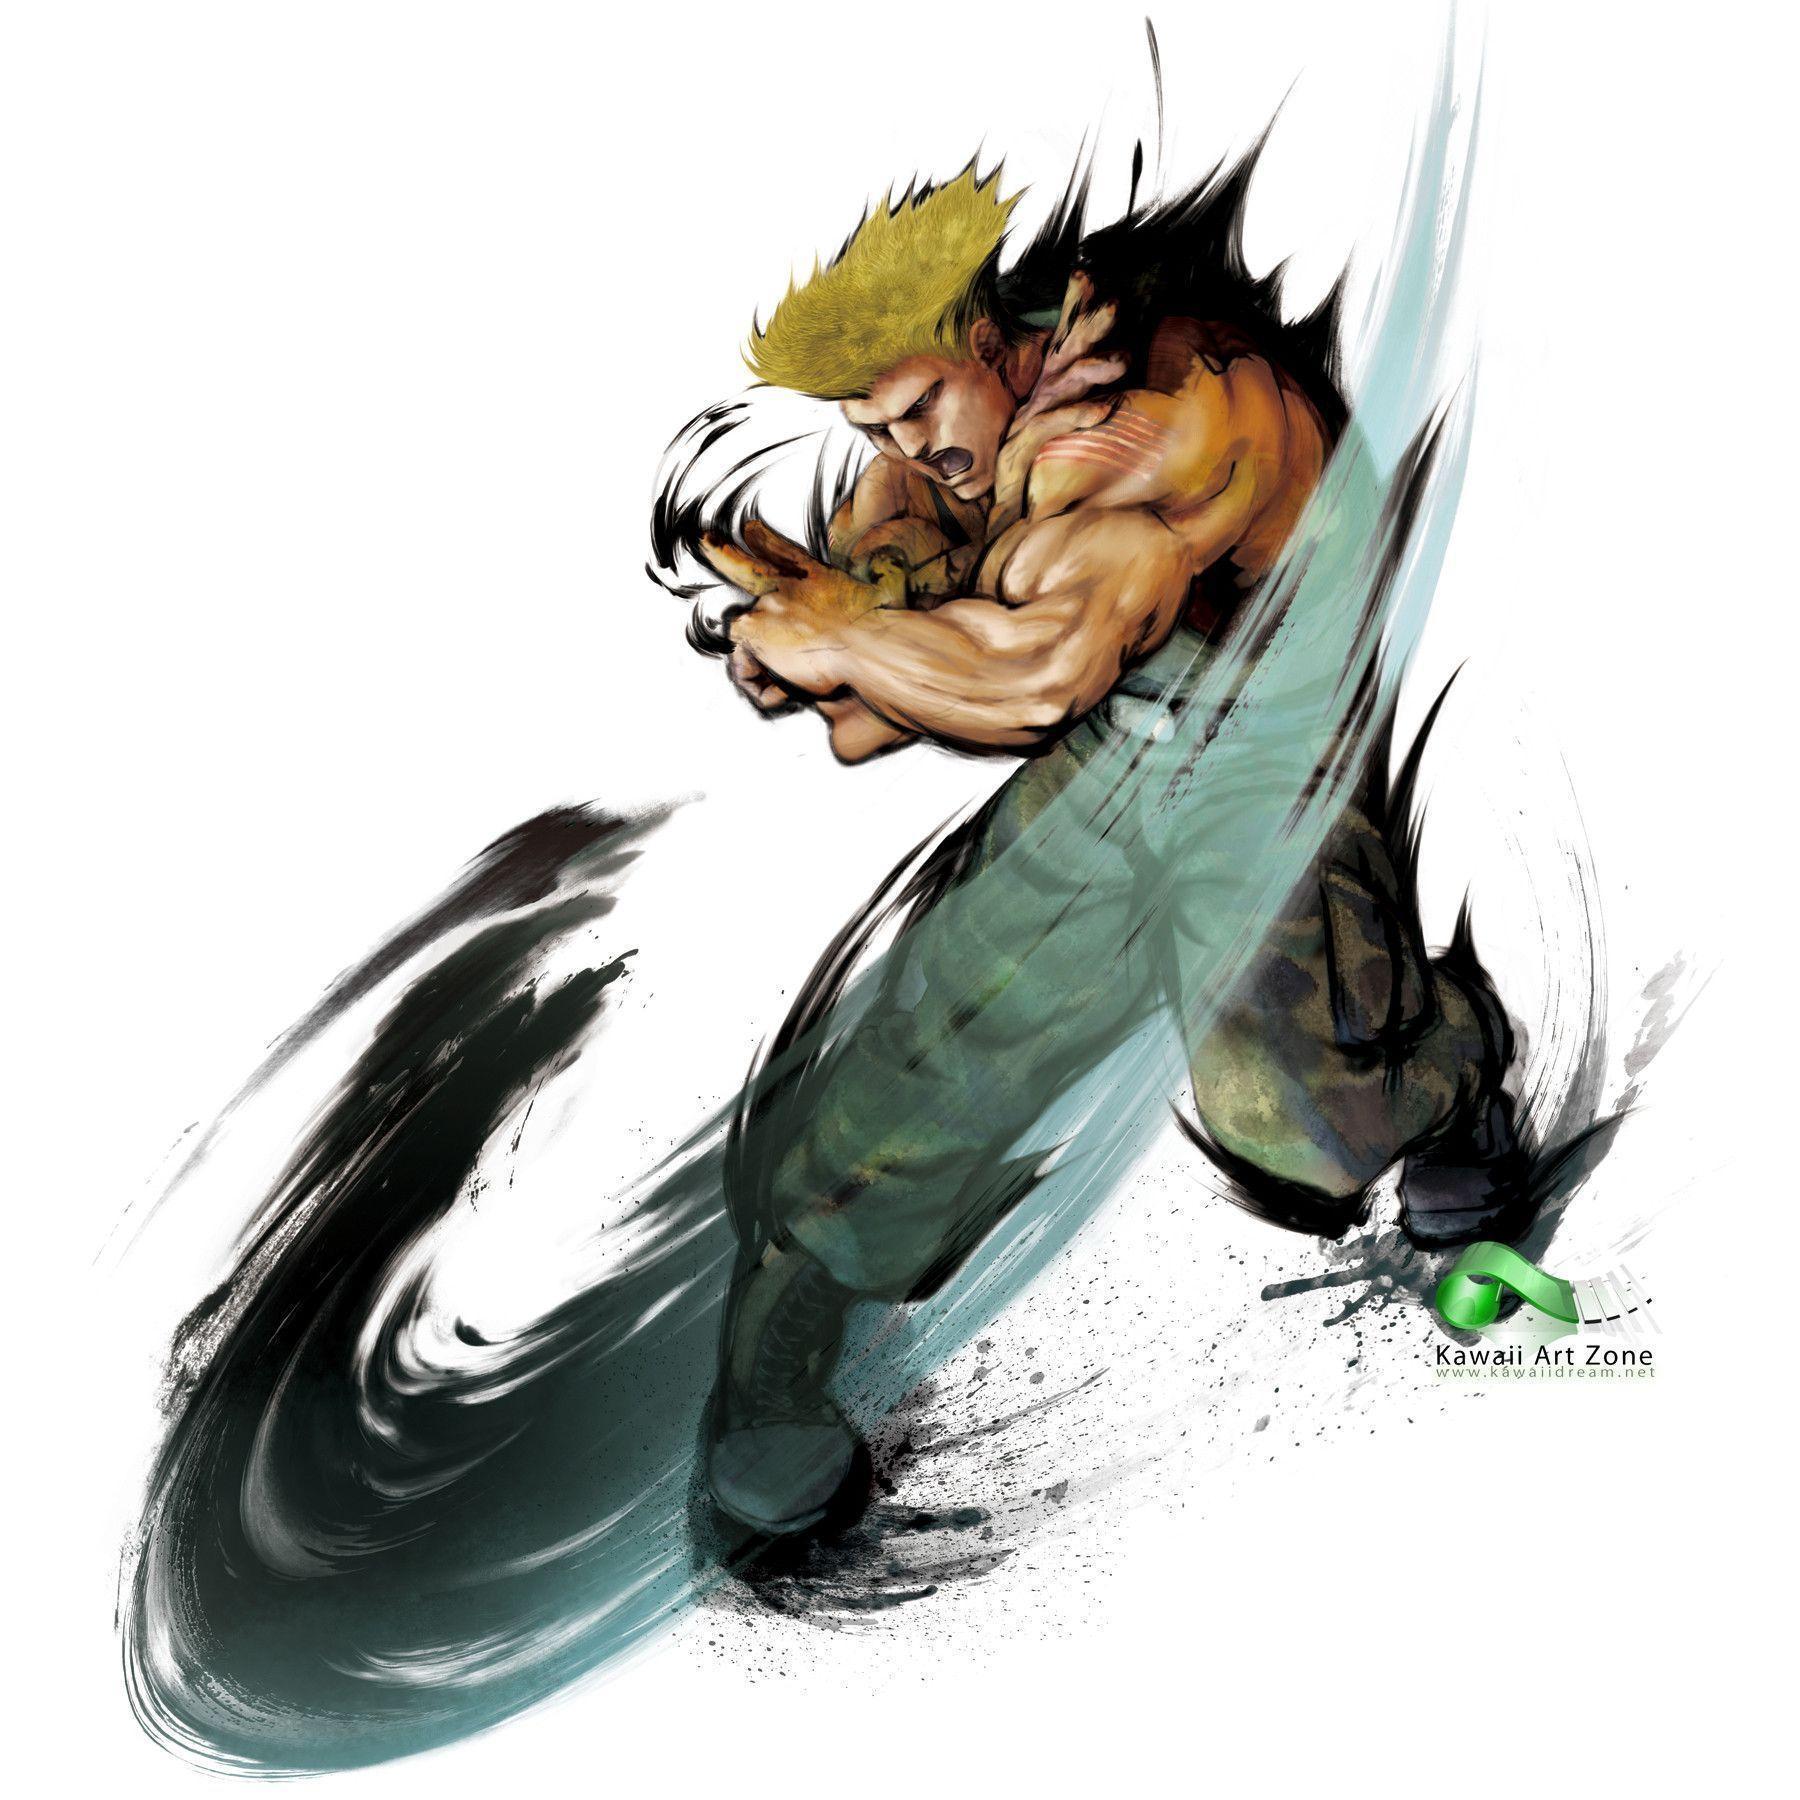 Favorite street fighter?. Discussion